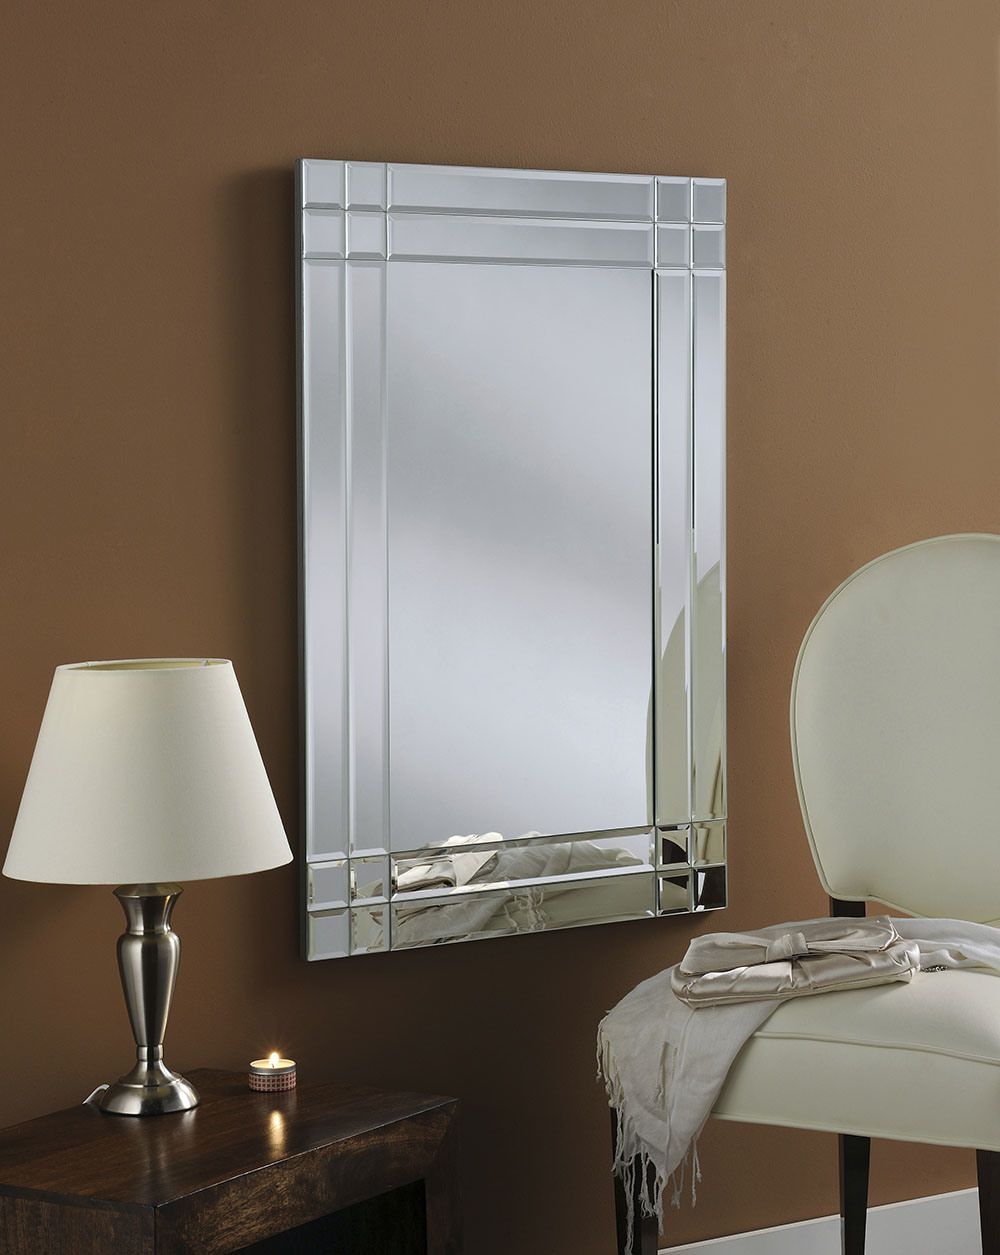 China Vanity Sheffield Home Decorative Modern Wall Mirror – China Intended For Loftis Modern & Contemporary Accent Wall Mirrors (View 4 of 15)